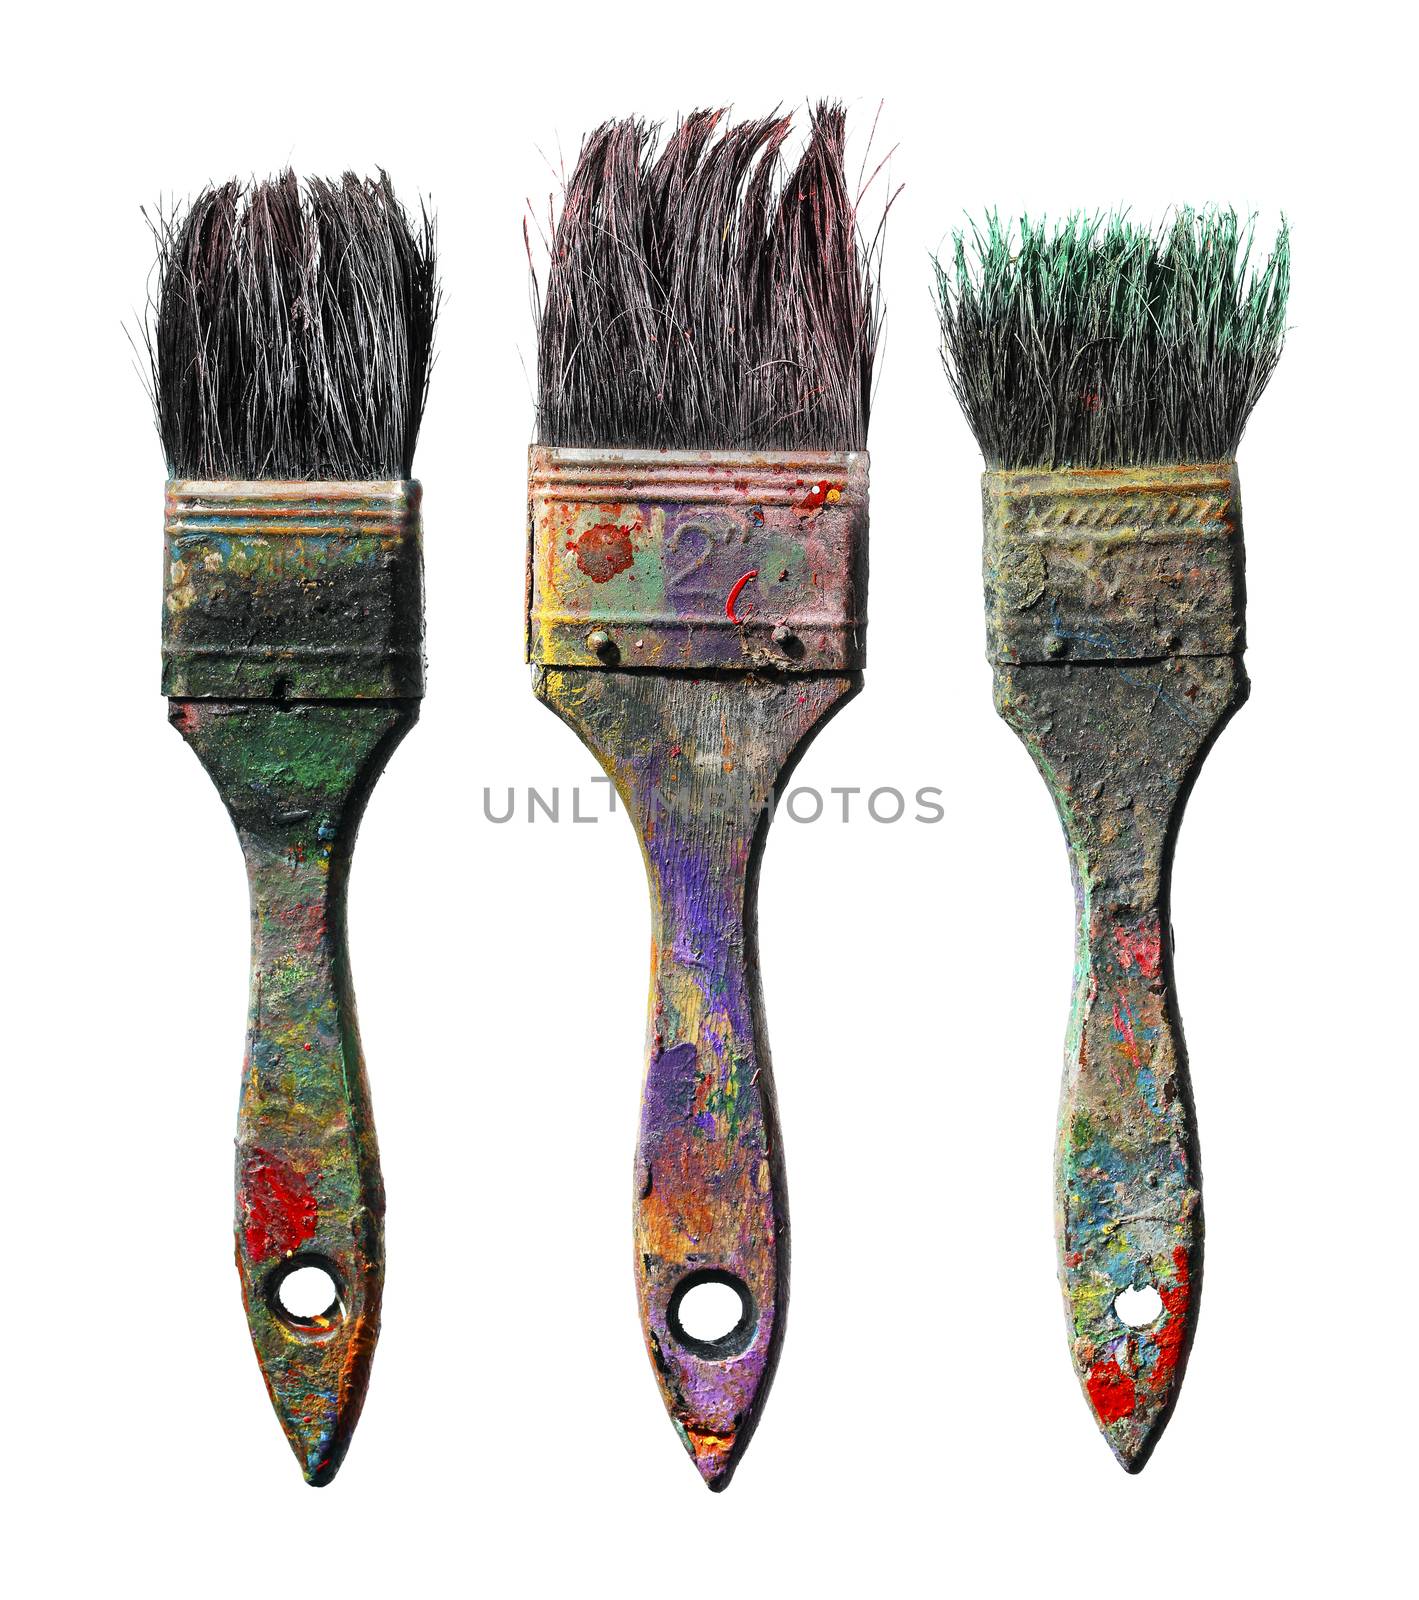 Ols Brushes by Stocksnapper